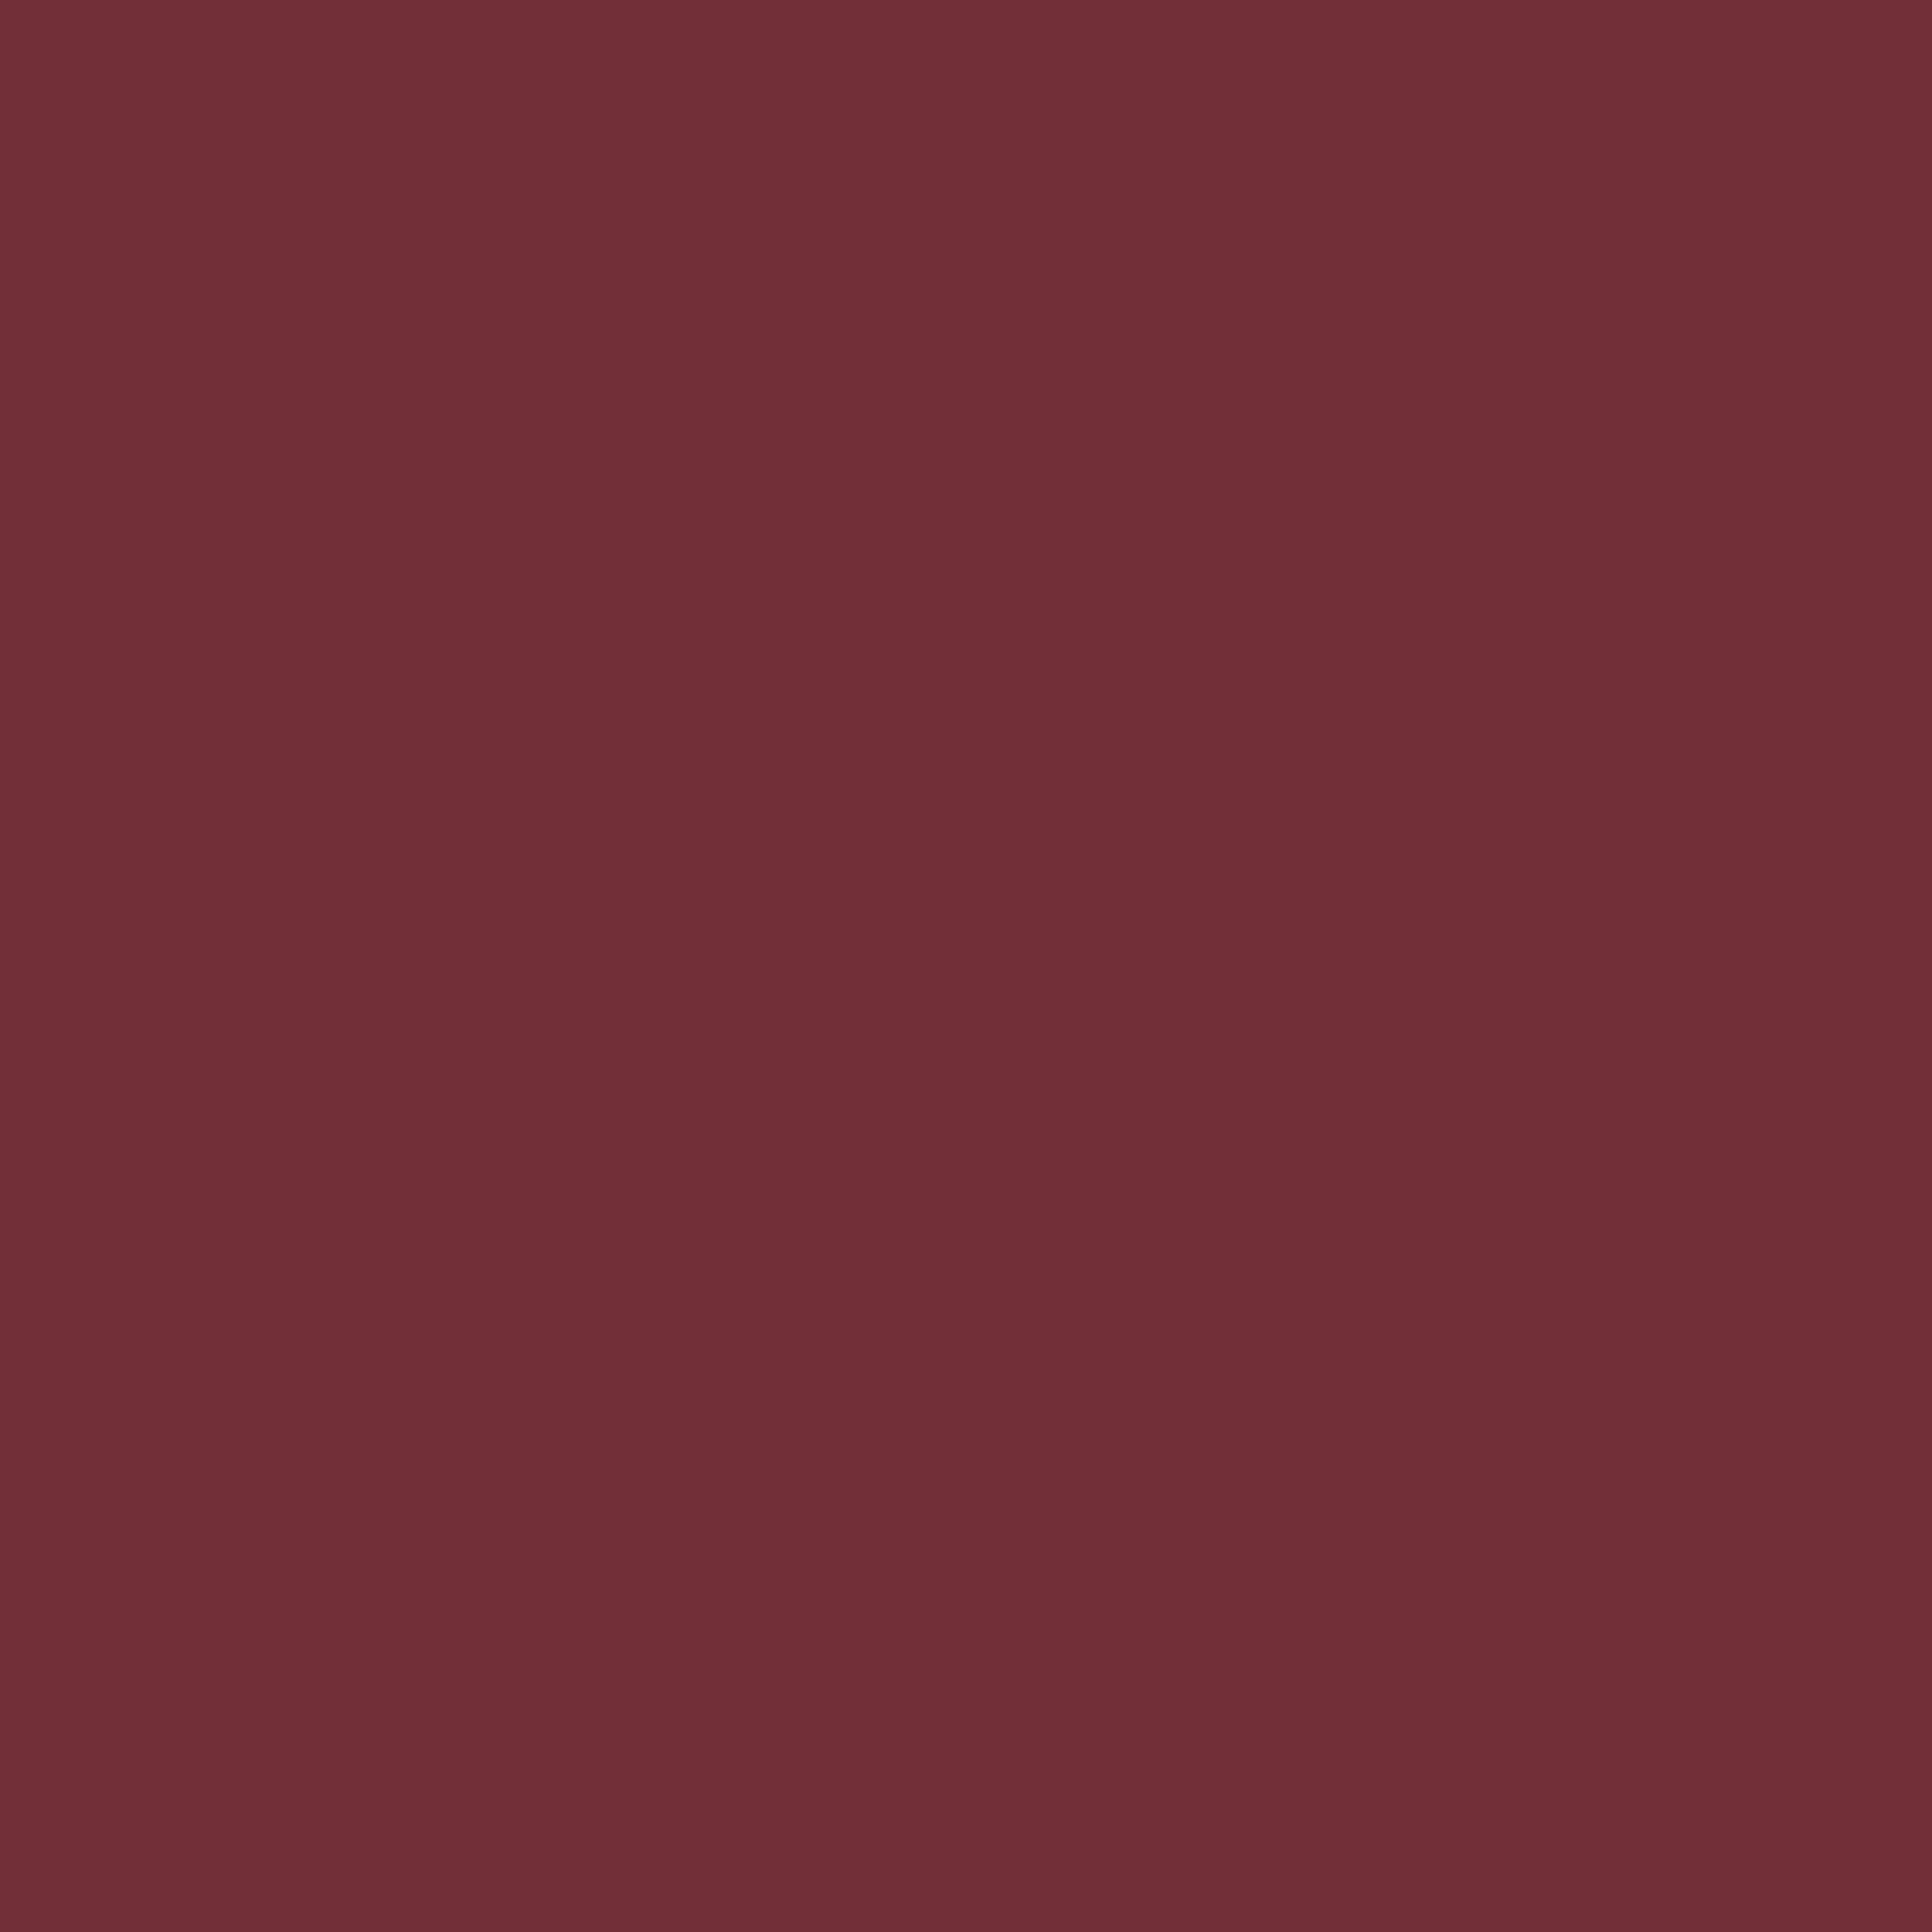 2732x2732 Wine Solid Color Background